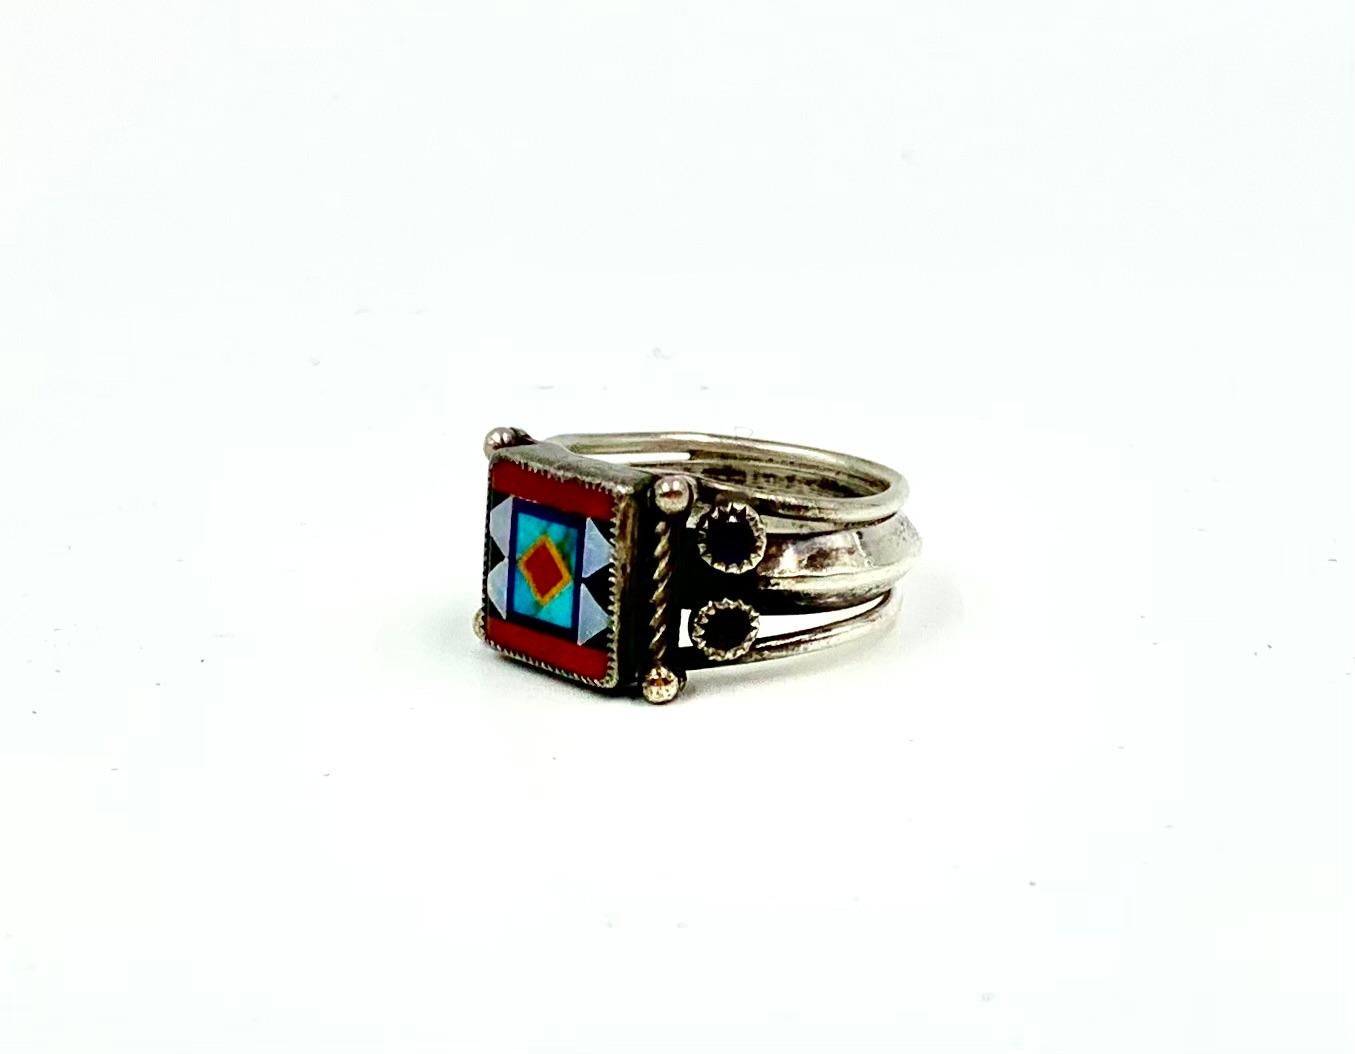 20th Century Aldrich Art Inlaid Opal Turquoise Coral Jet Lapis Lazuli Amethyst Silver Ring For Sale